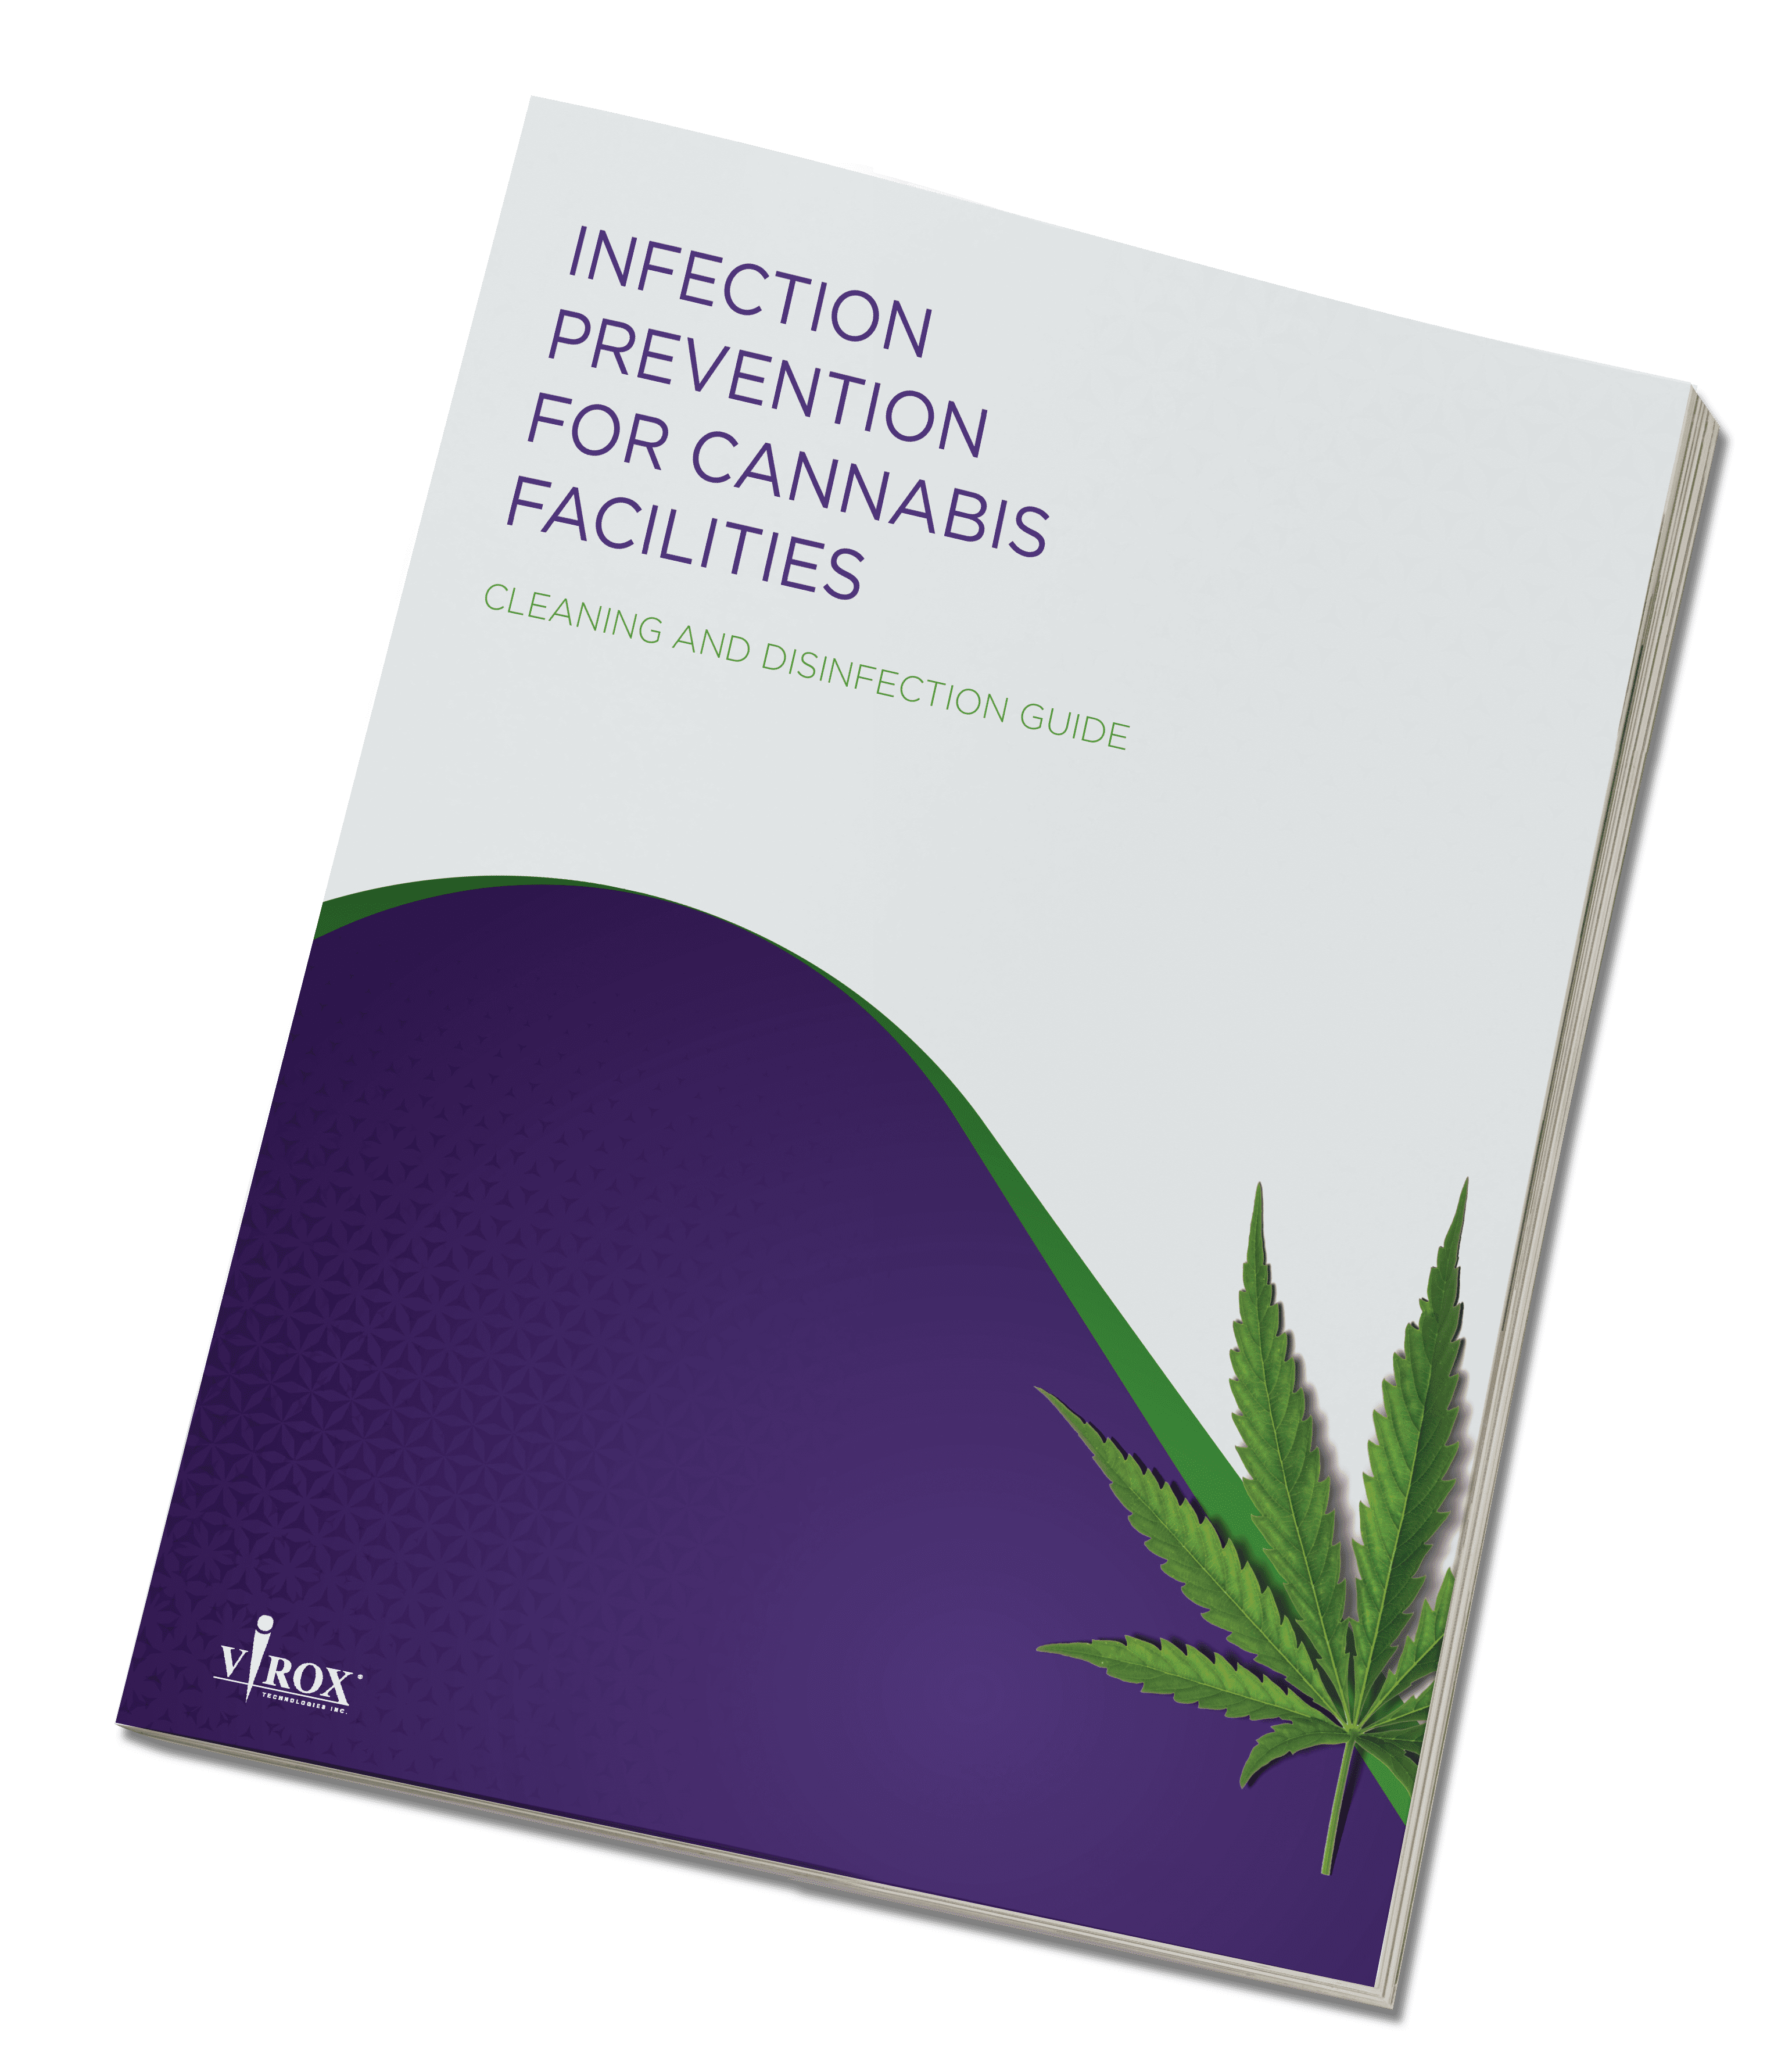 Check out the Infection Prevention for Cannabis Facilities: Cleaning and Disinfection Guide - a helpful resource designed to help facilities achieve optimal disinfection and cleaning standards.